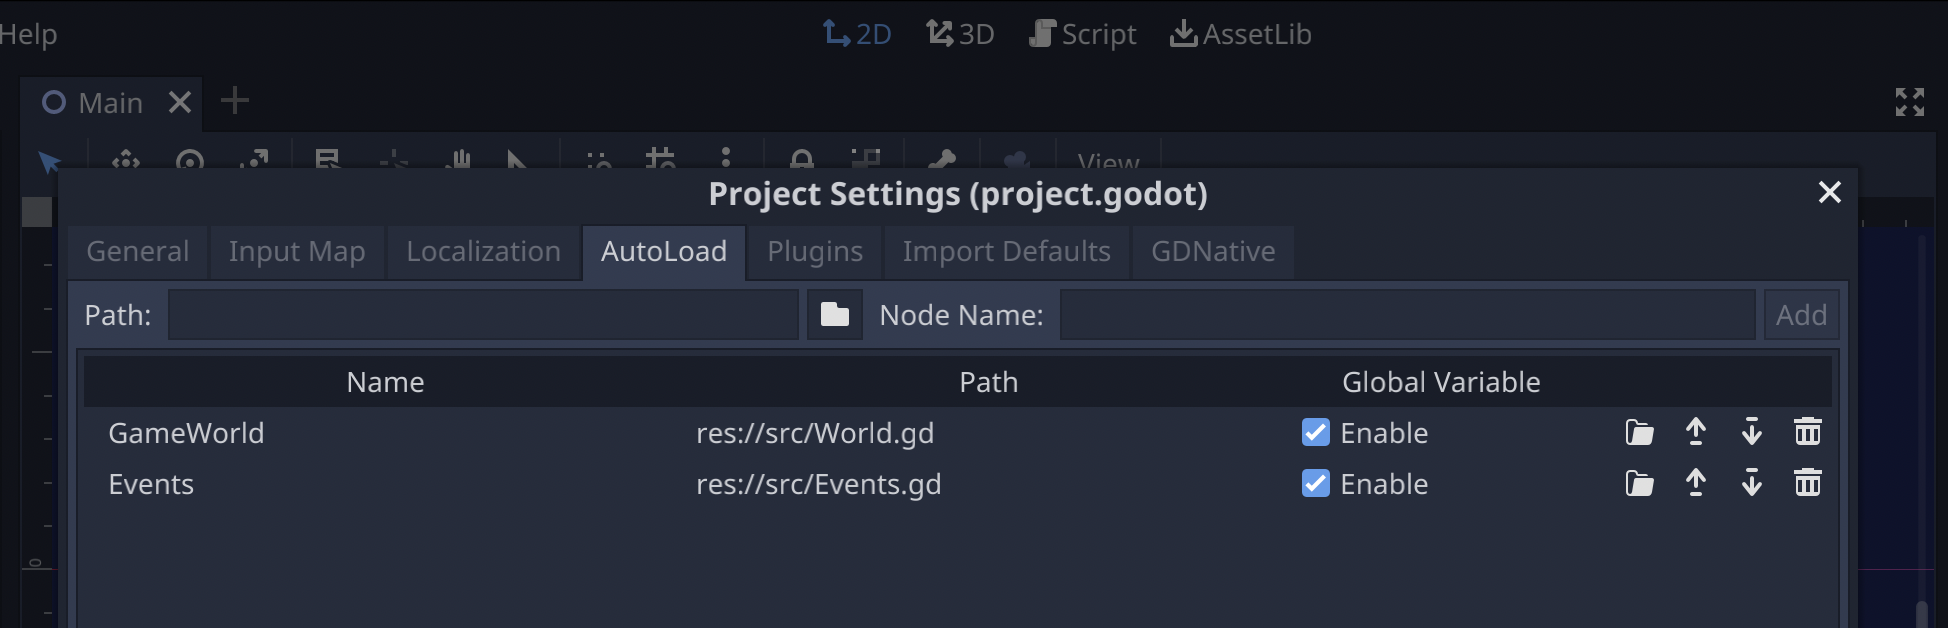 autoload scripts in project.settings